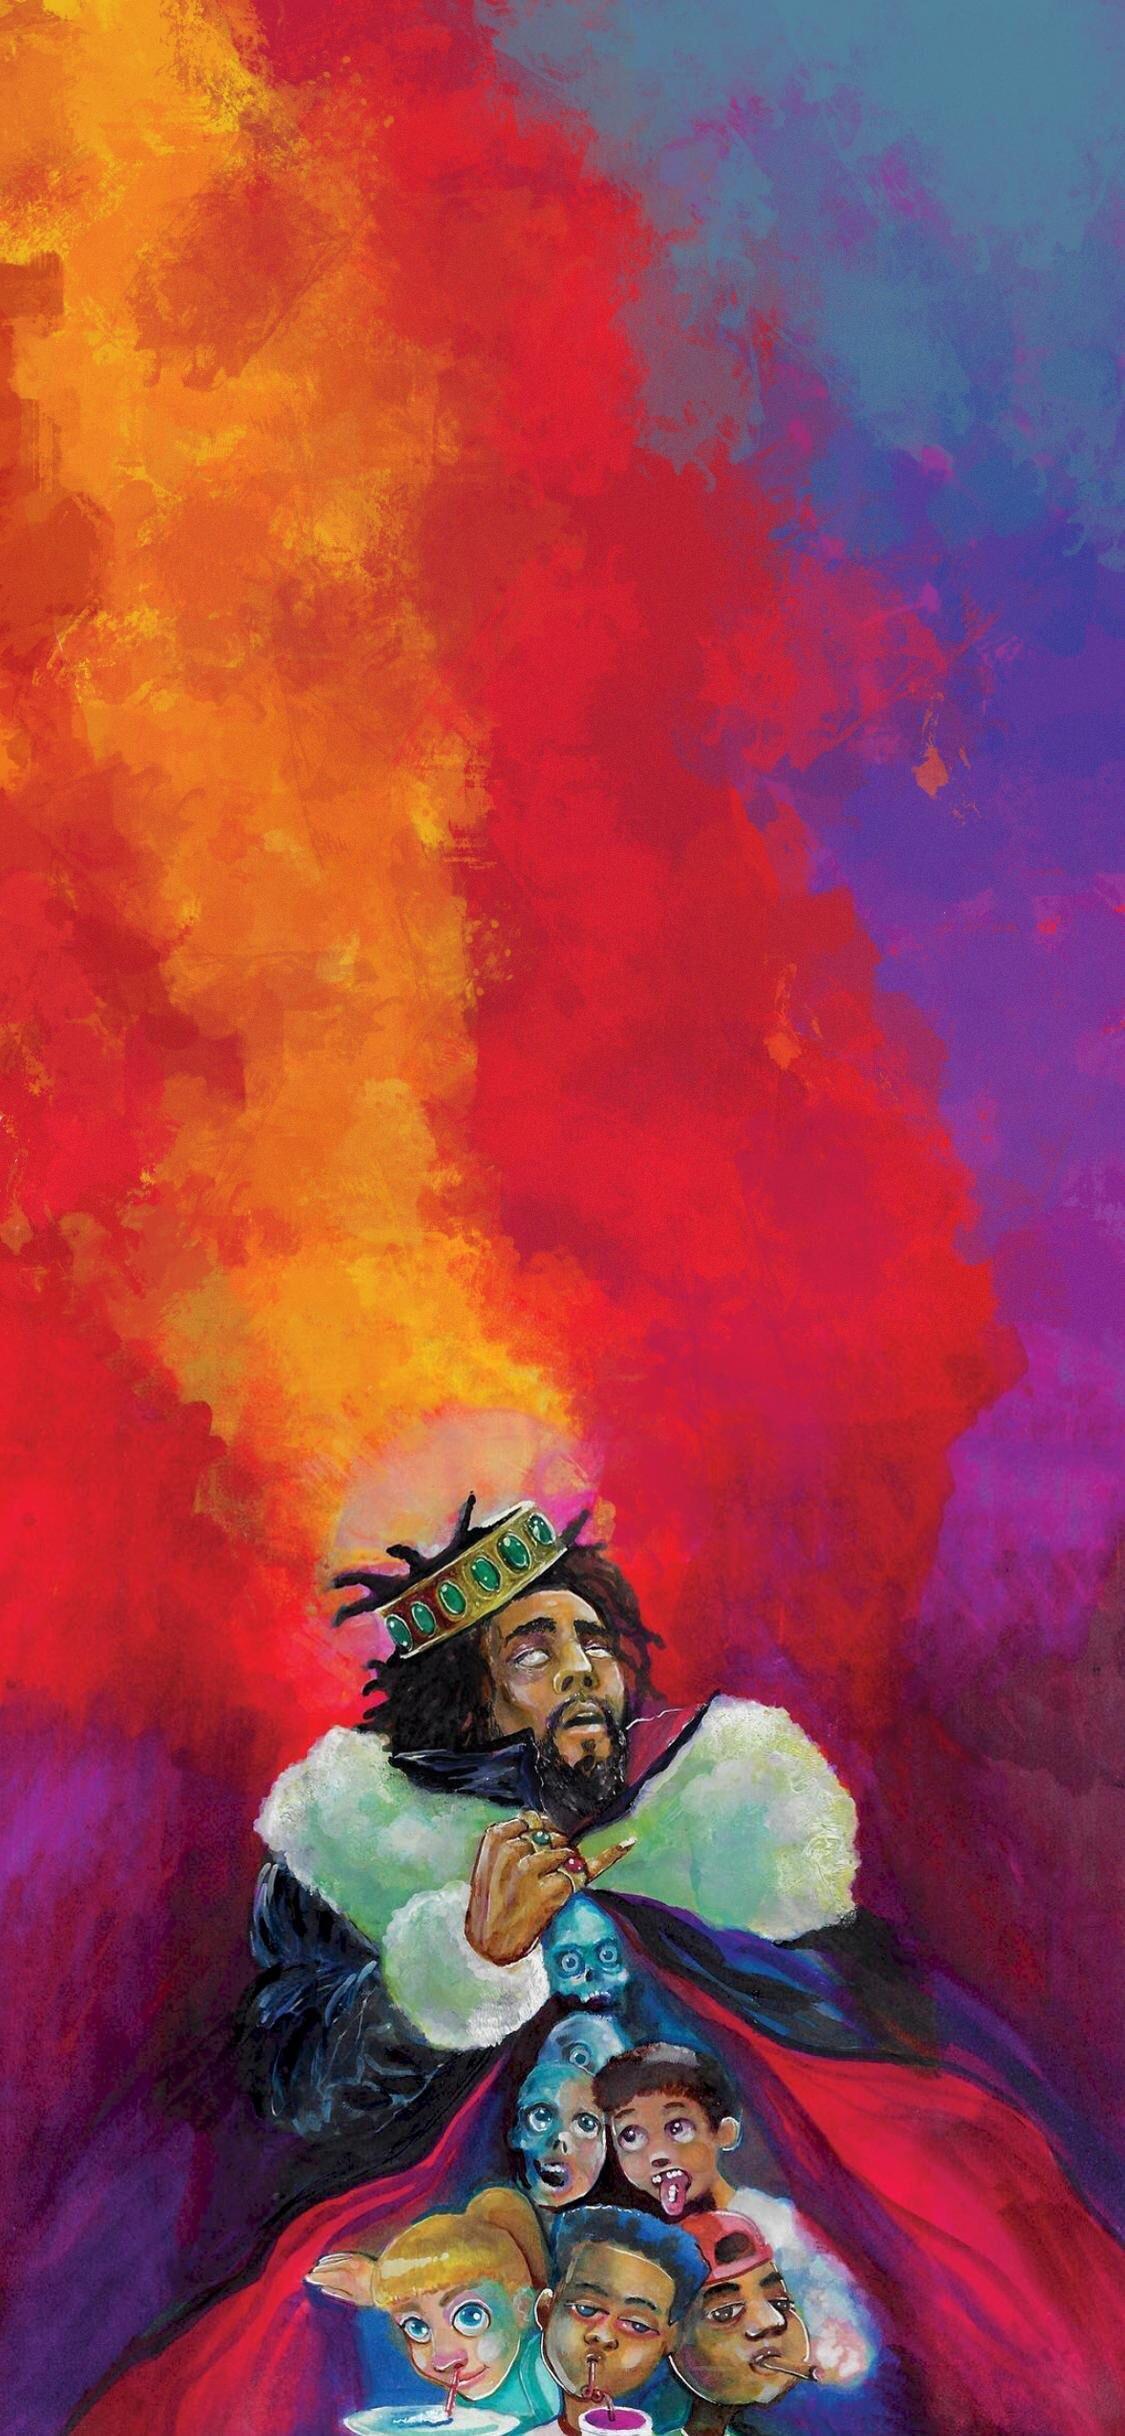 KOD wallpaper for iPhone i found